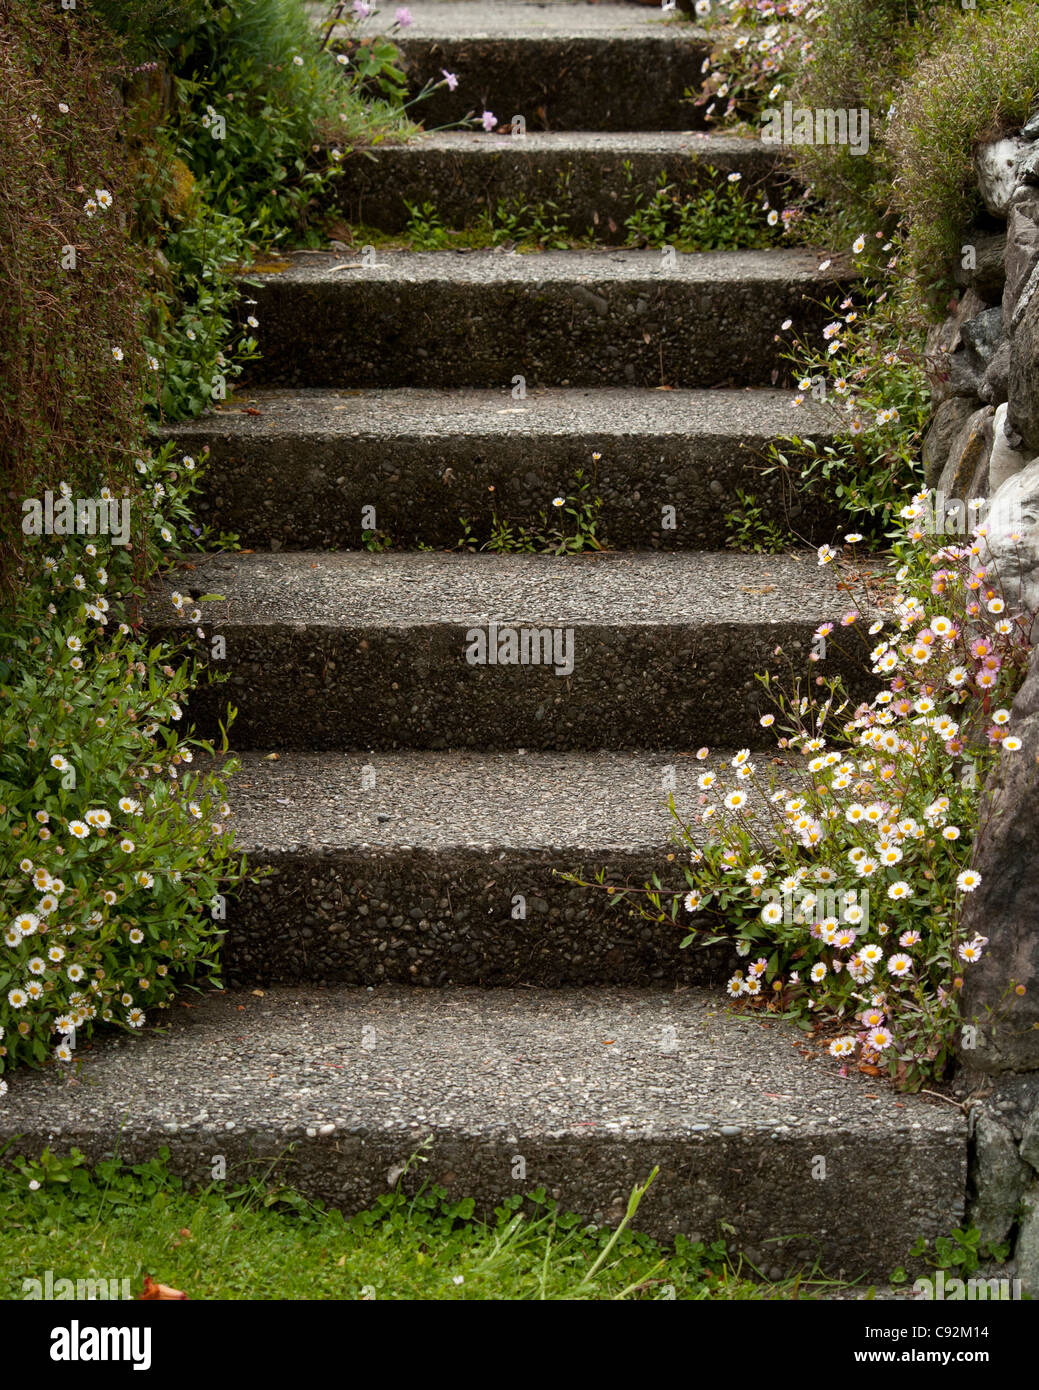 steps surrounds by flowers and rocks Stock Photo